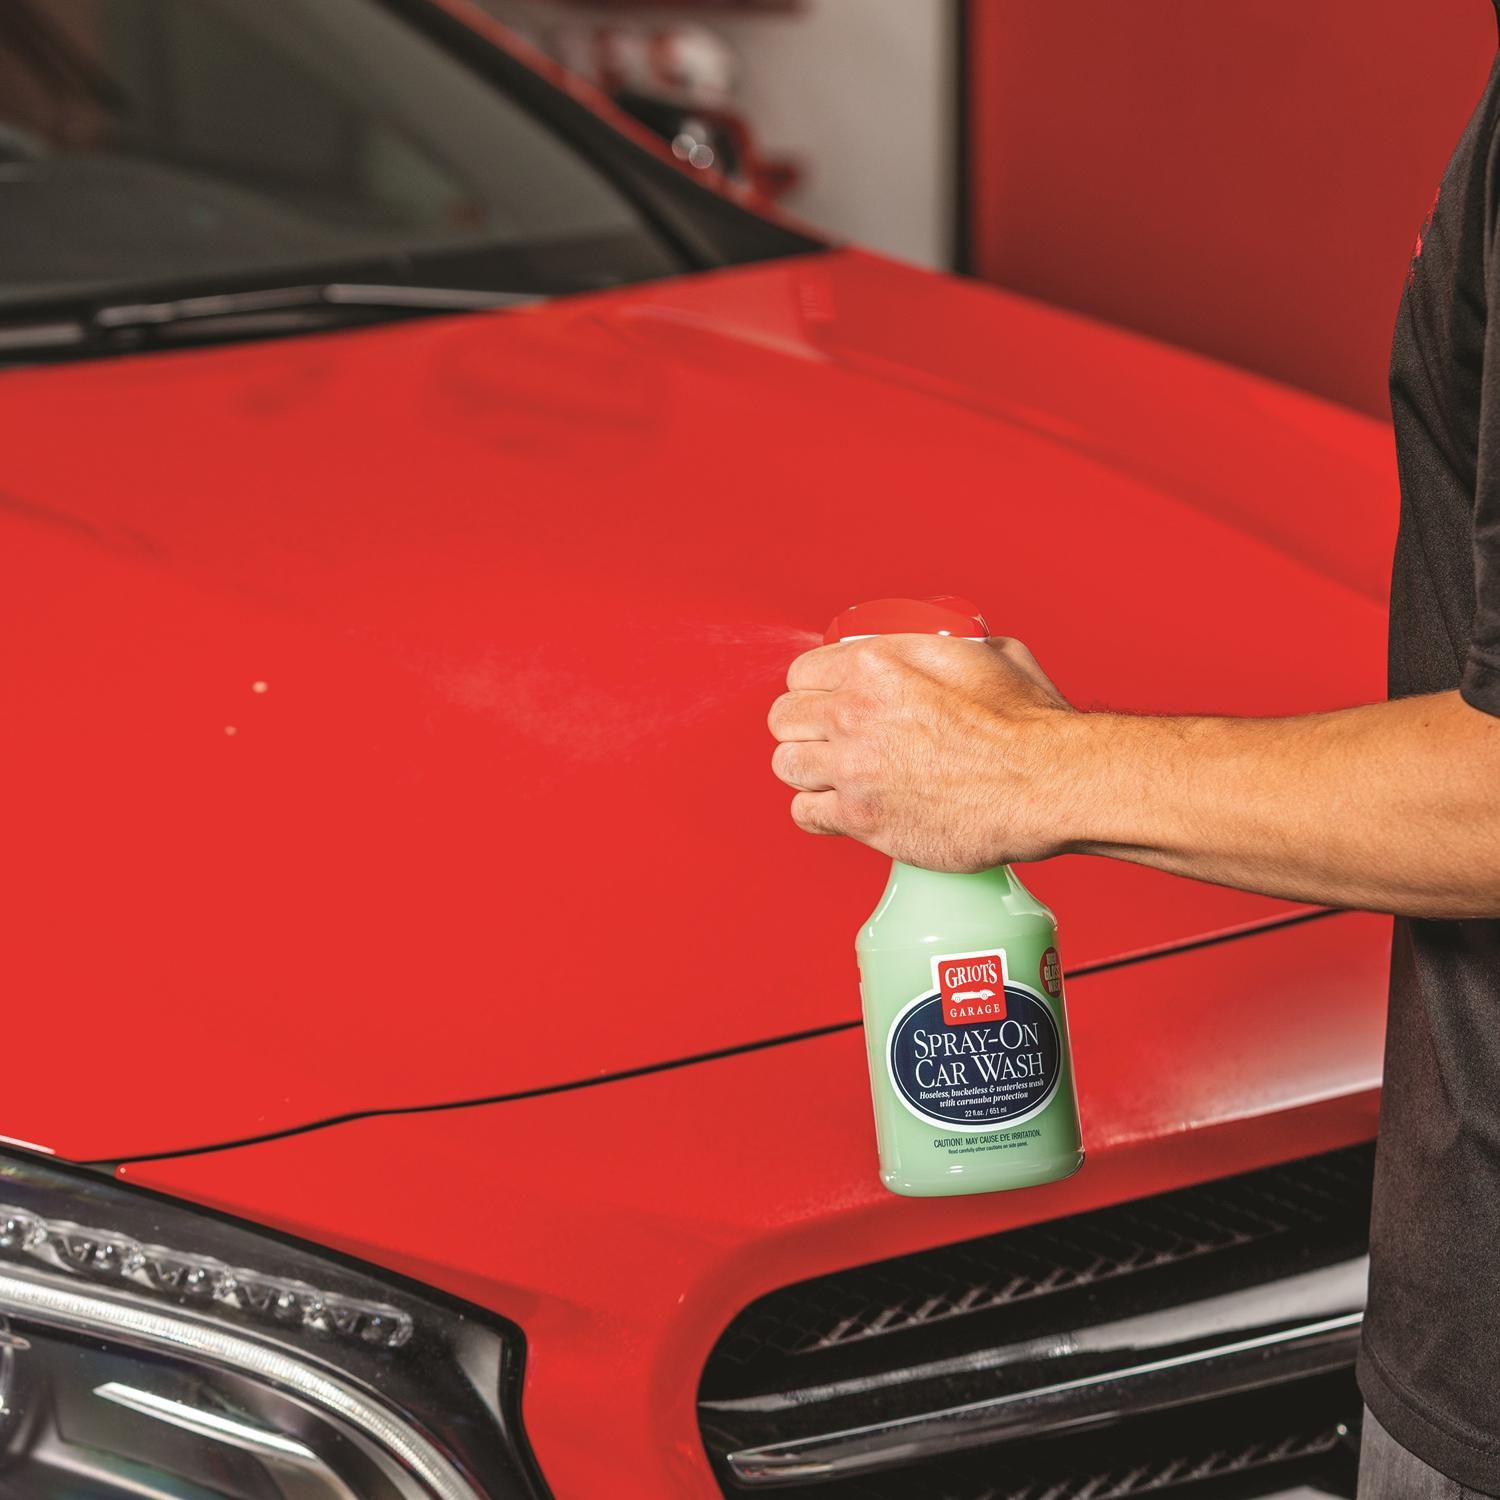 Rinseless Wash & Wax for Autos - Griot's Garage